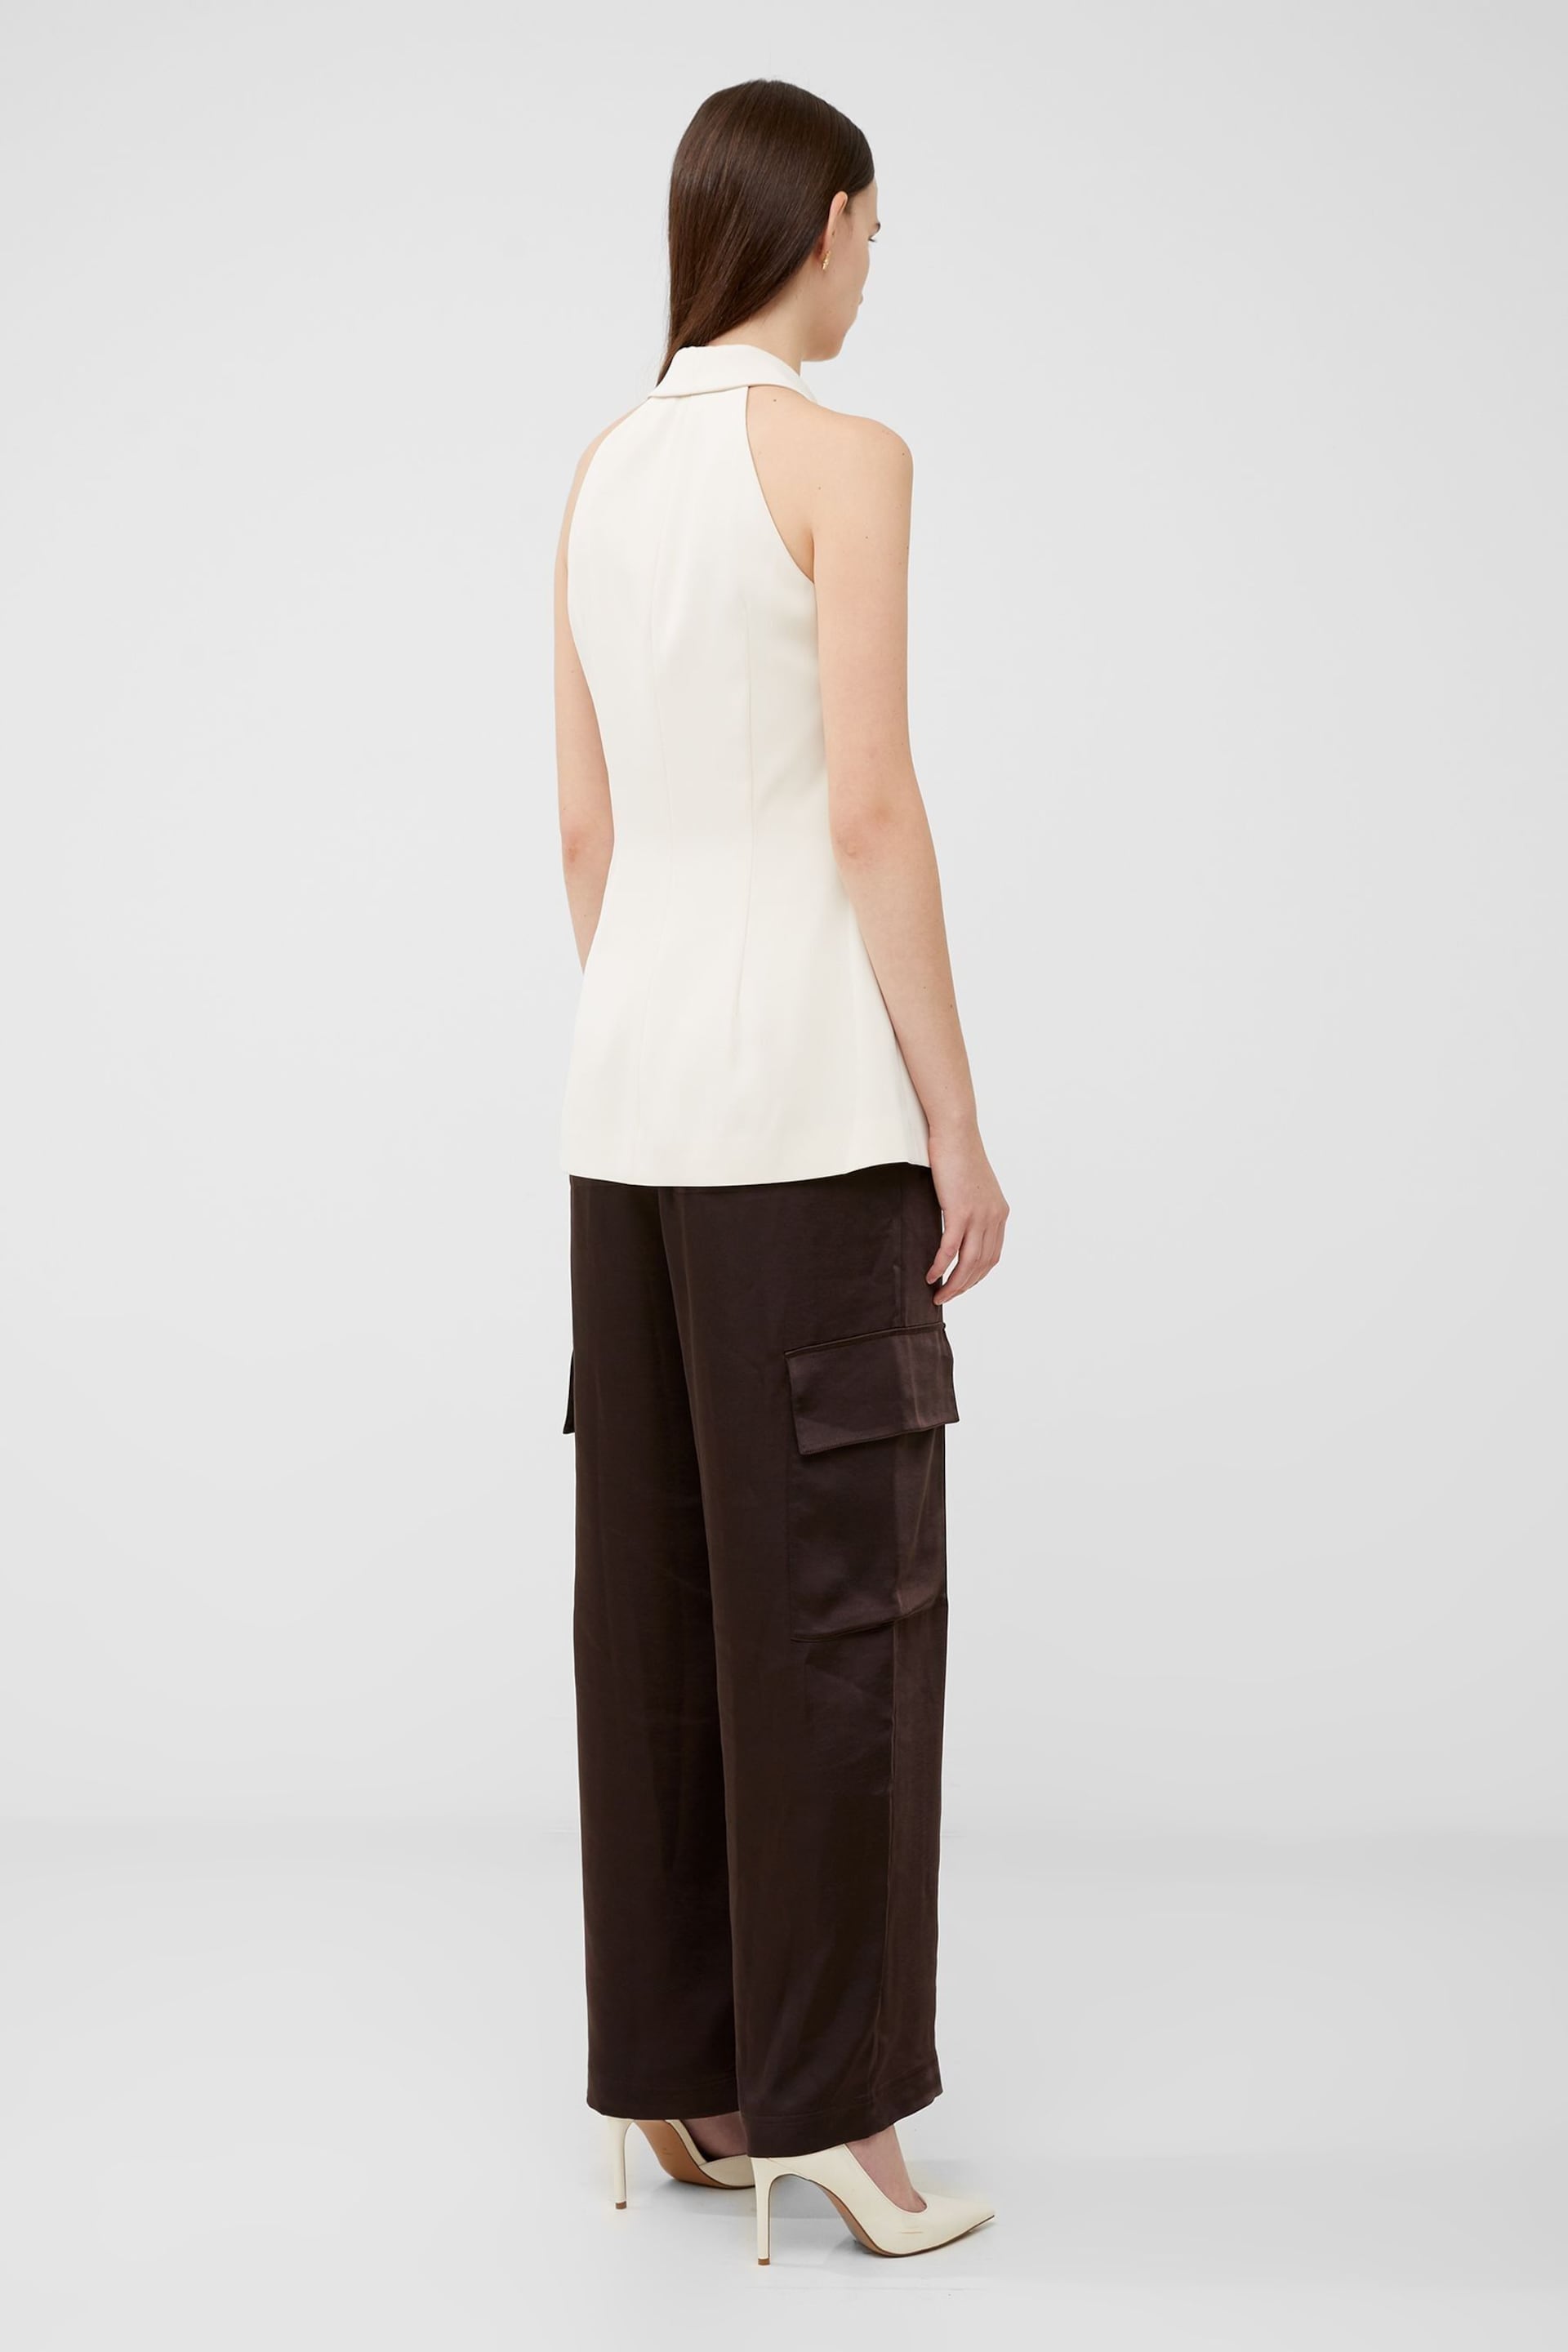 French Connection Harrie Halter Nk Waistcoat - Image 2 of 4